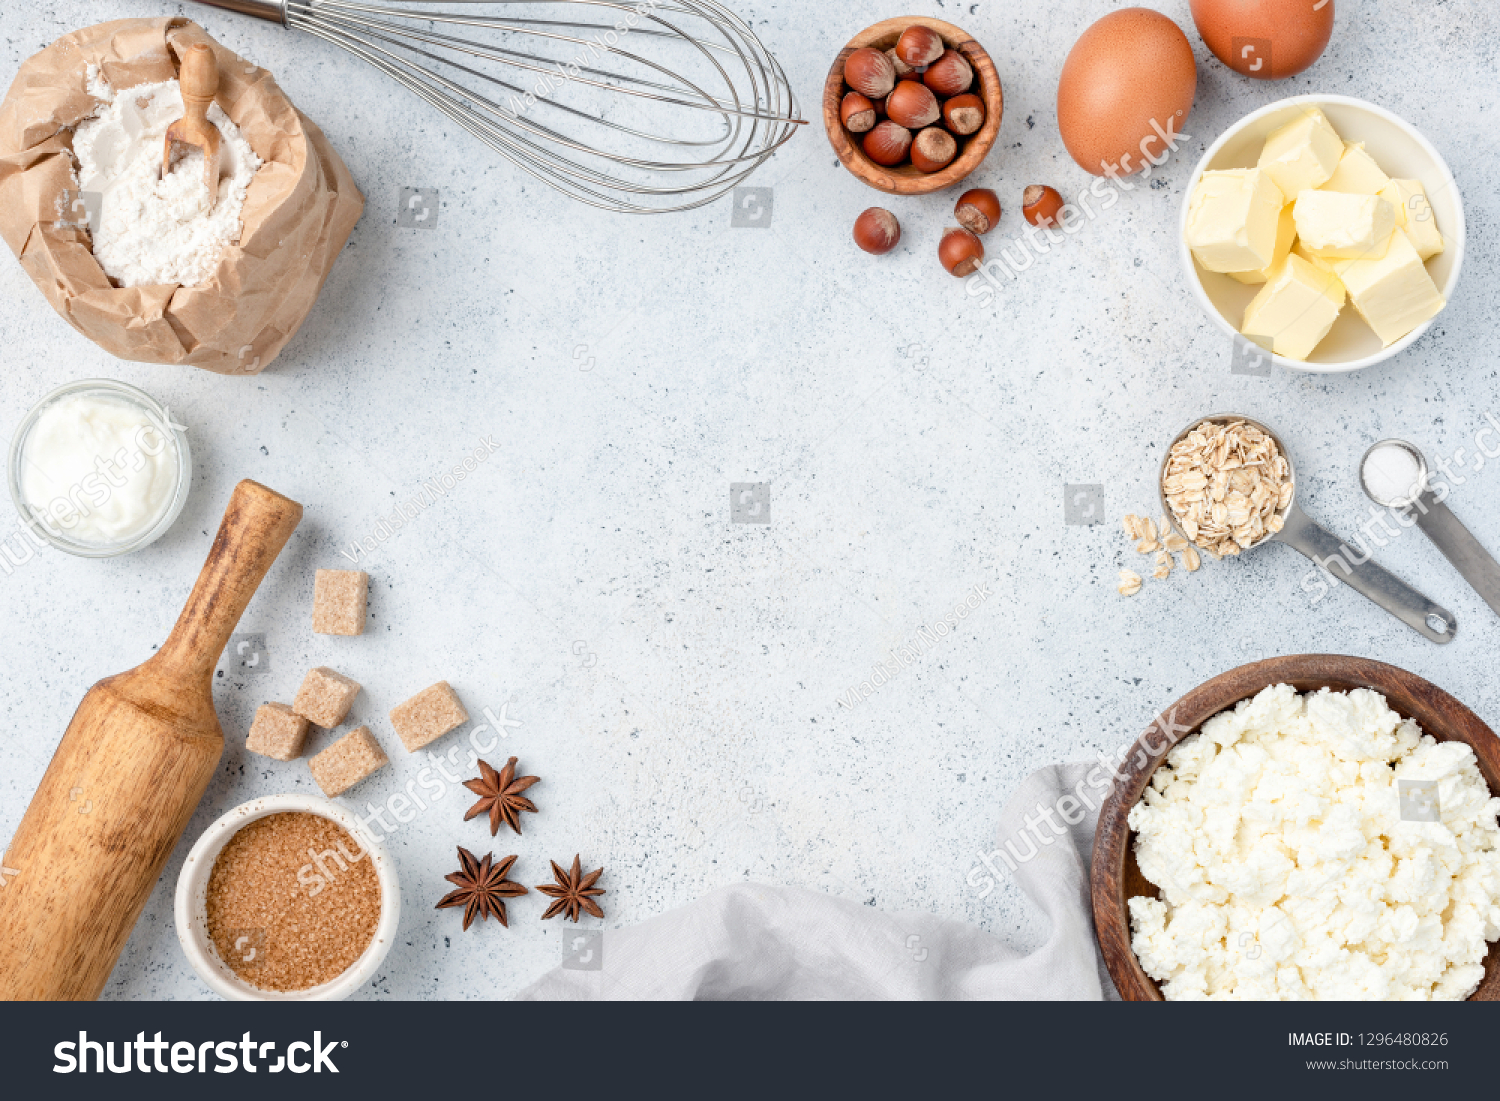 Baking concept, baking ingredients on background. Ingredients for baking cake, cookies, bread or pastry. Frame of cooking kitchen utensils and food #1296480826